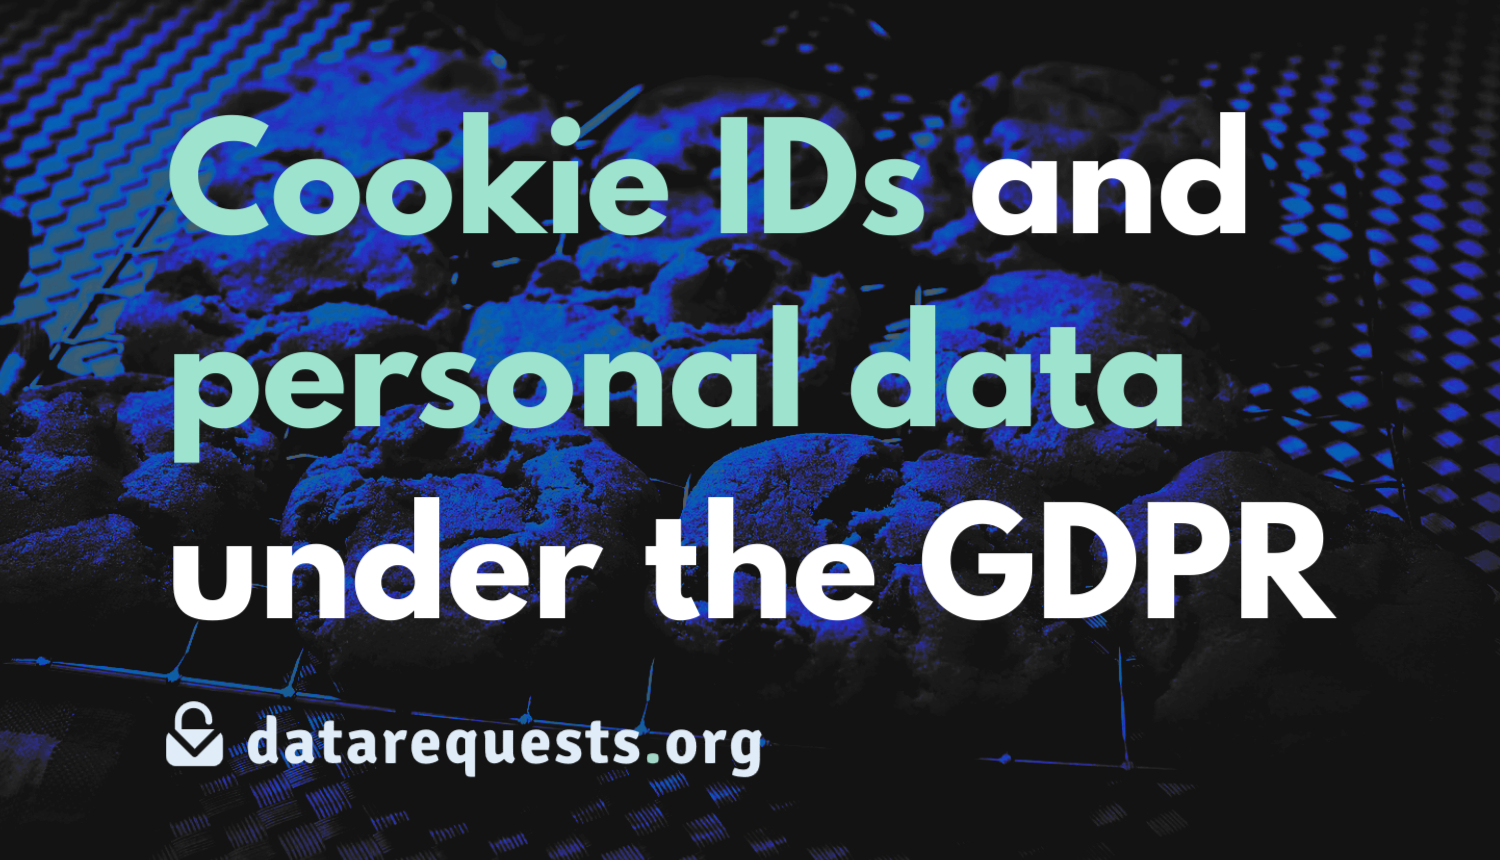 Stylized photo with a blue tint of tray of cookies, above that the text: “Cookie IDs and personal data under the GDPR”